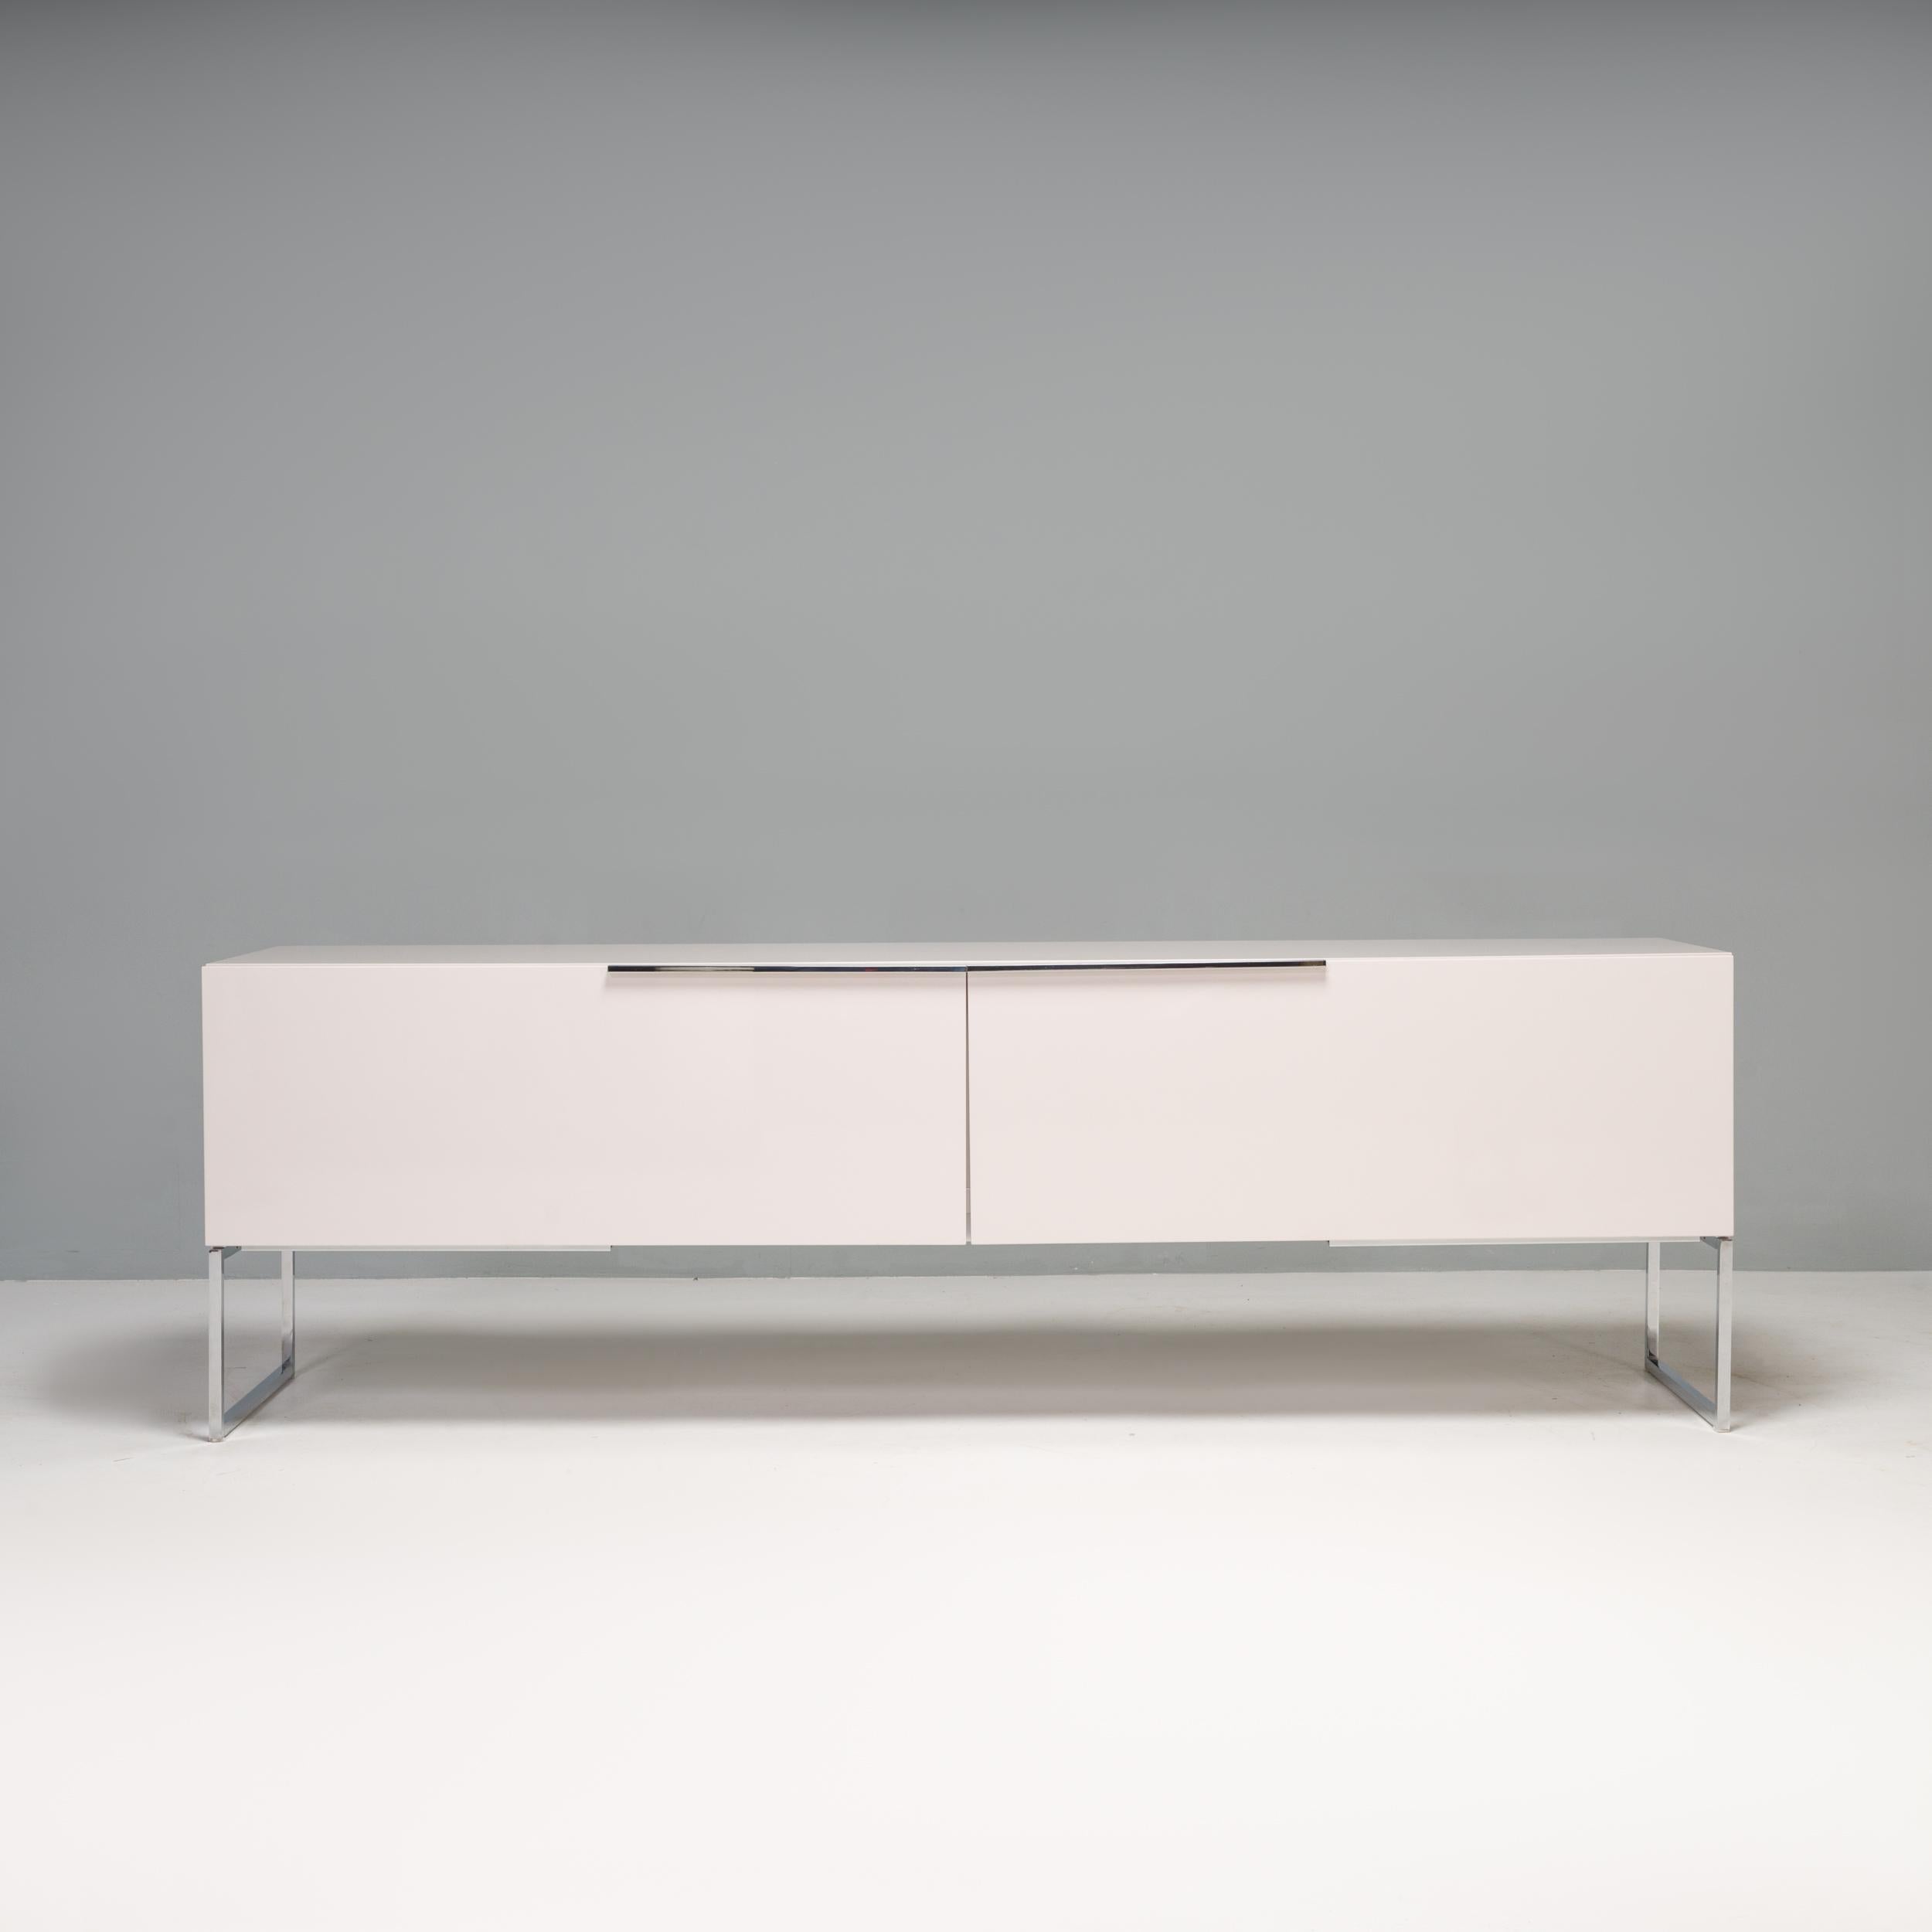 Designed by Paolo Piva for B&B Italia, the Athos sideboard perfectly showcases Piva’s architectural style.

Featuring a glossy white finish, the sideboard has two compartments, sitting on slimline, angular brushed chrome legs.

The sideboard